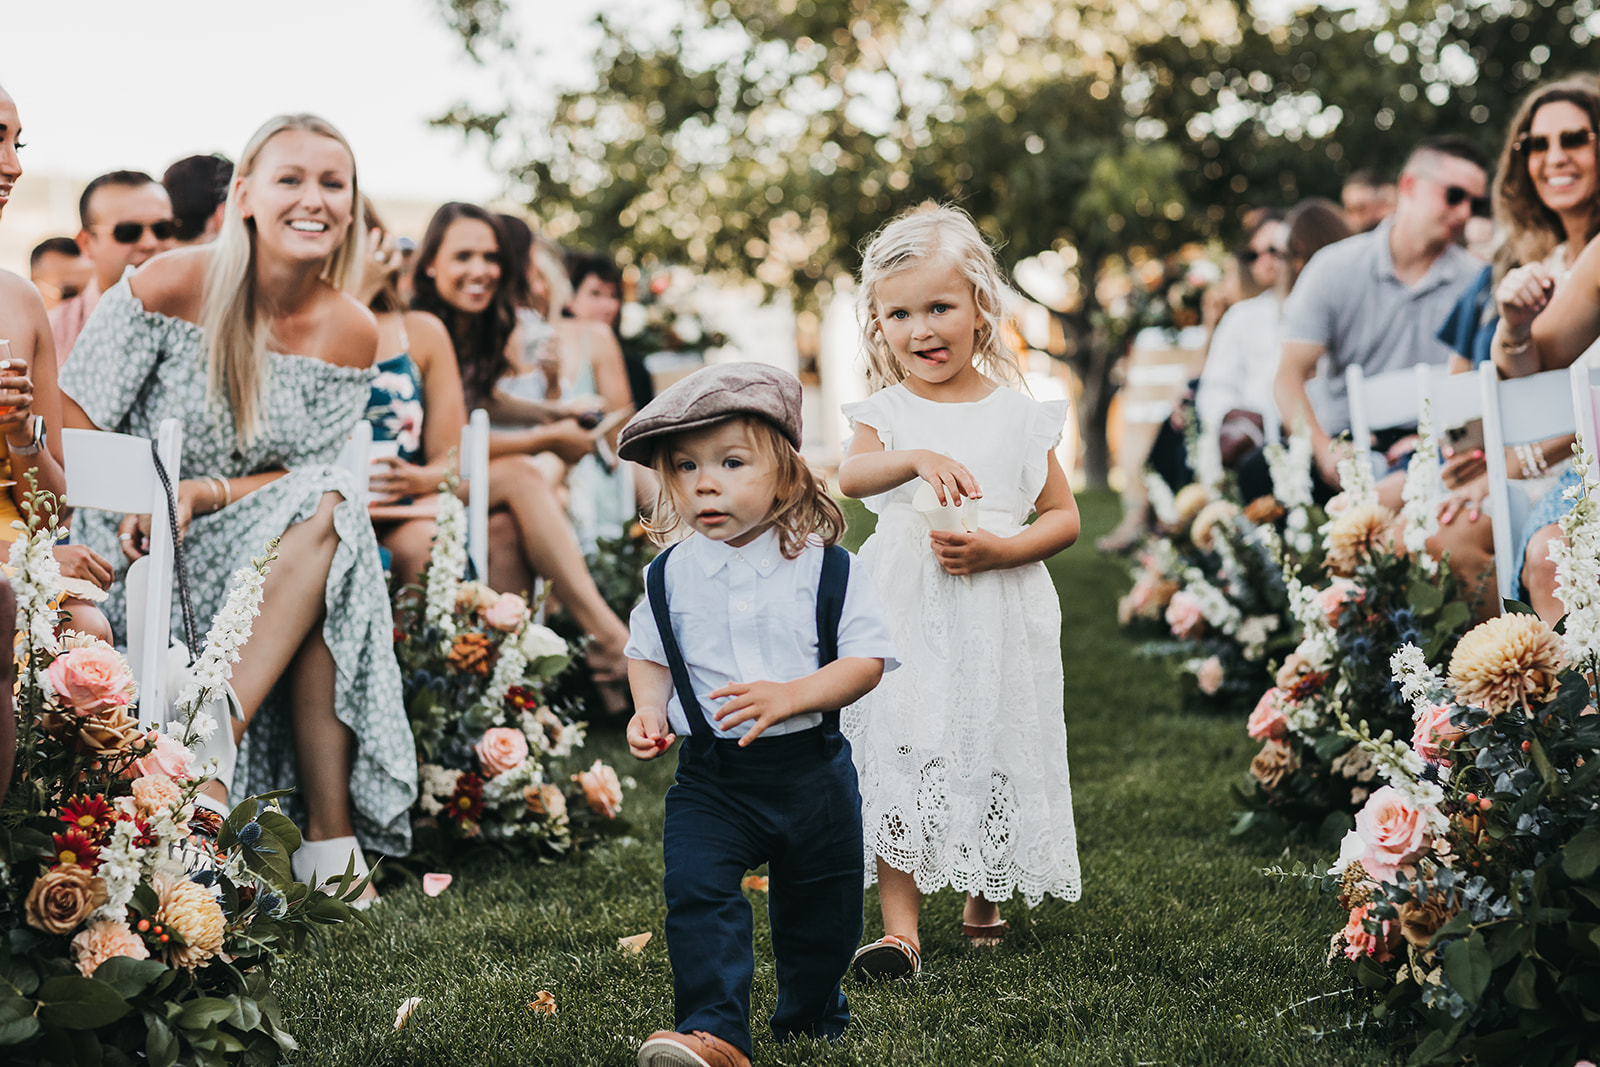 Ring barrier and flower girl walk down the aisle together